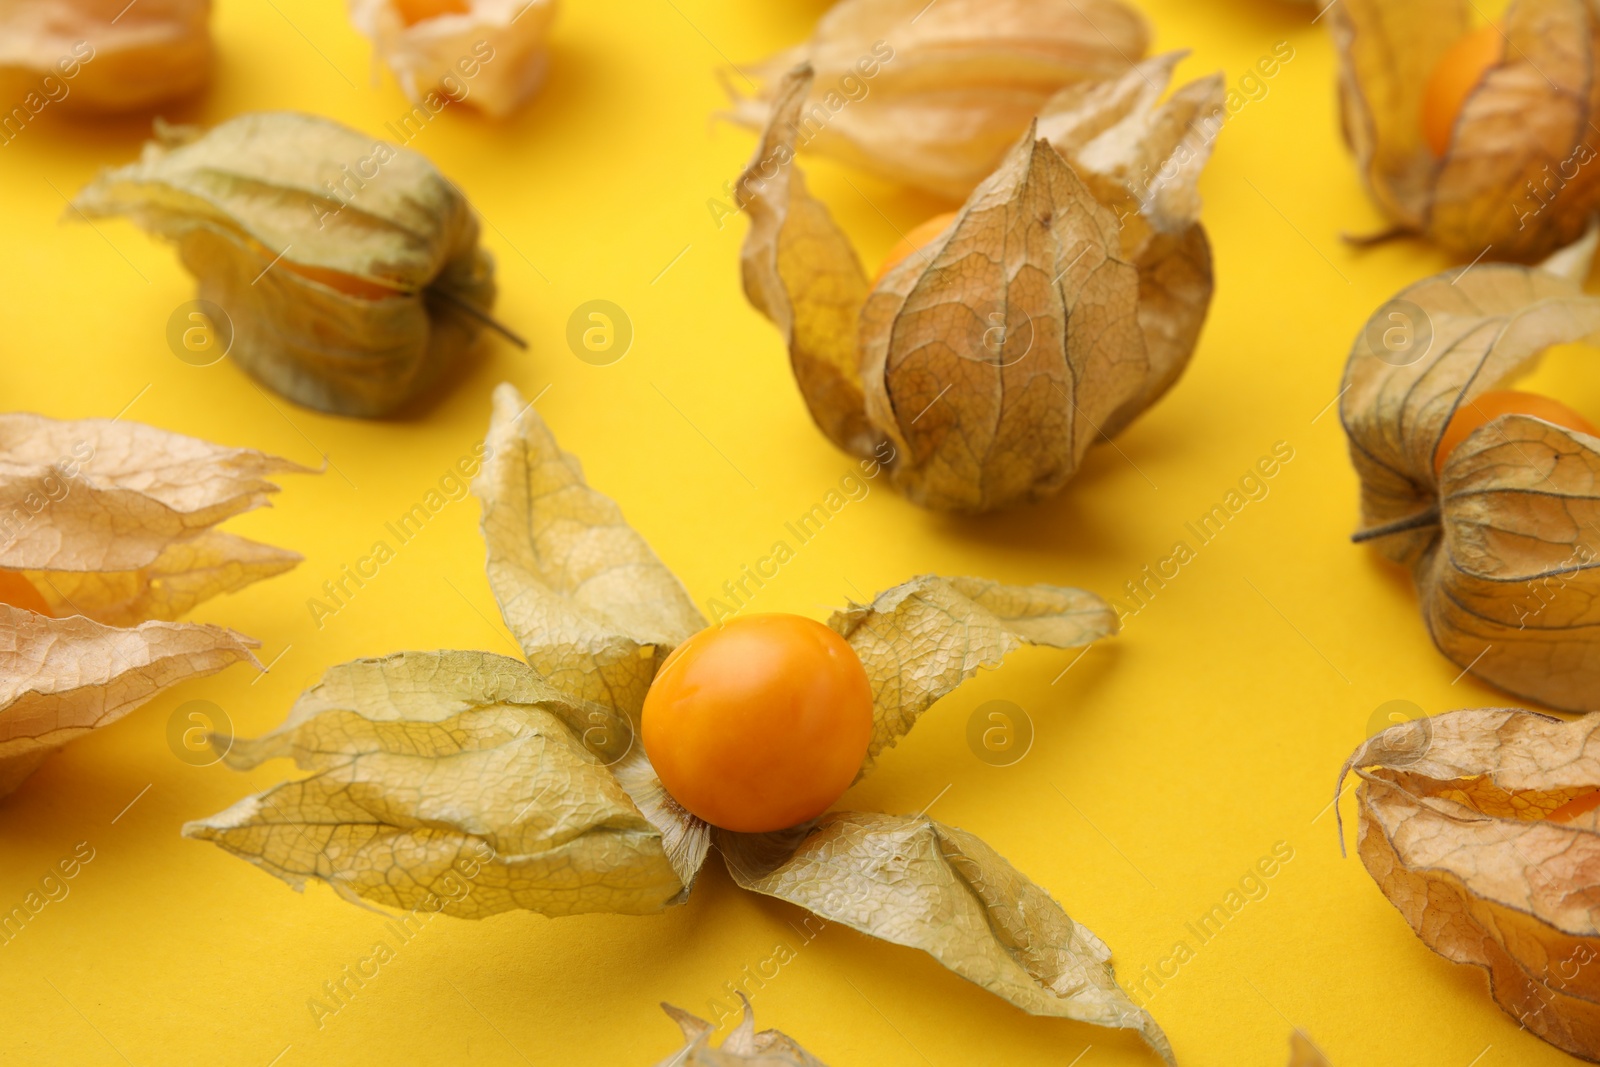 Photo of Ripe physalis fruits with calyxes on yellow background, closeup